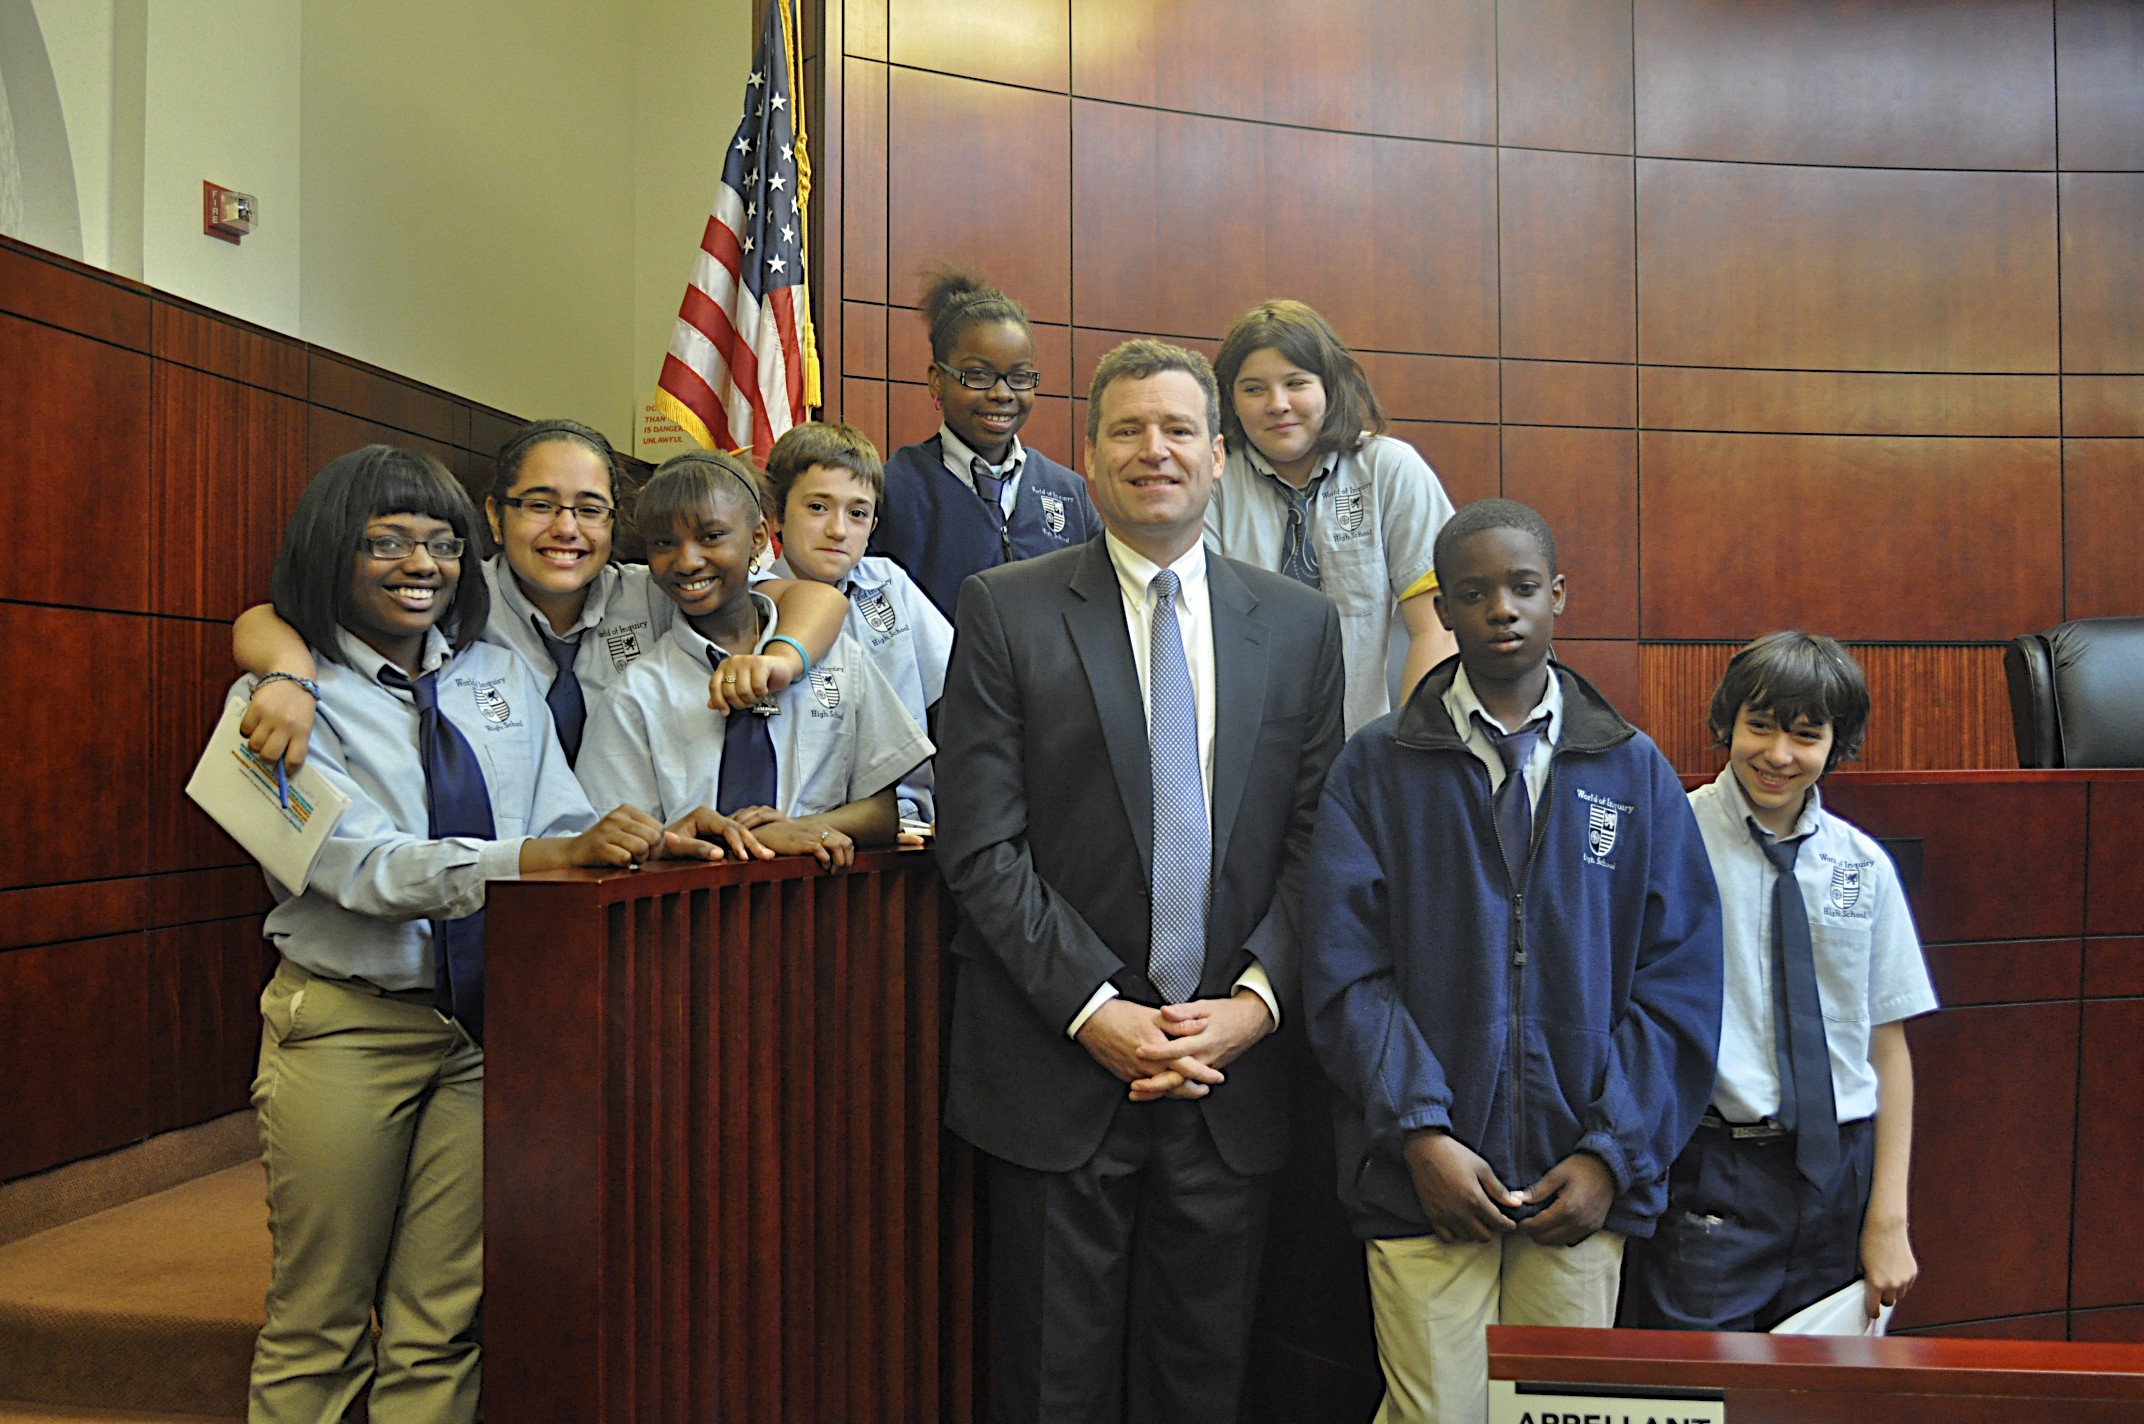 Justice Lindley with students